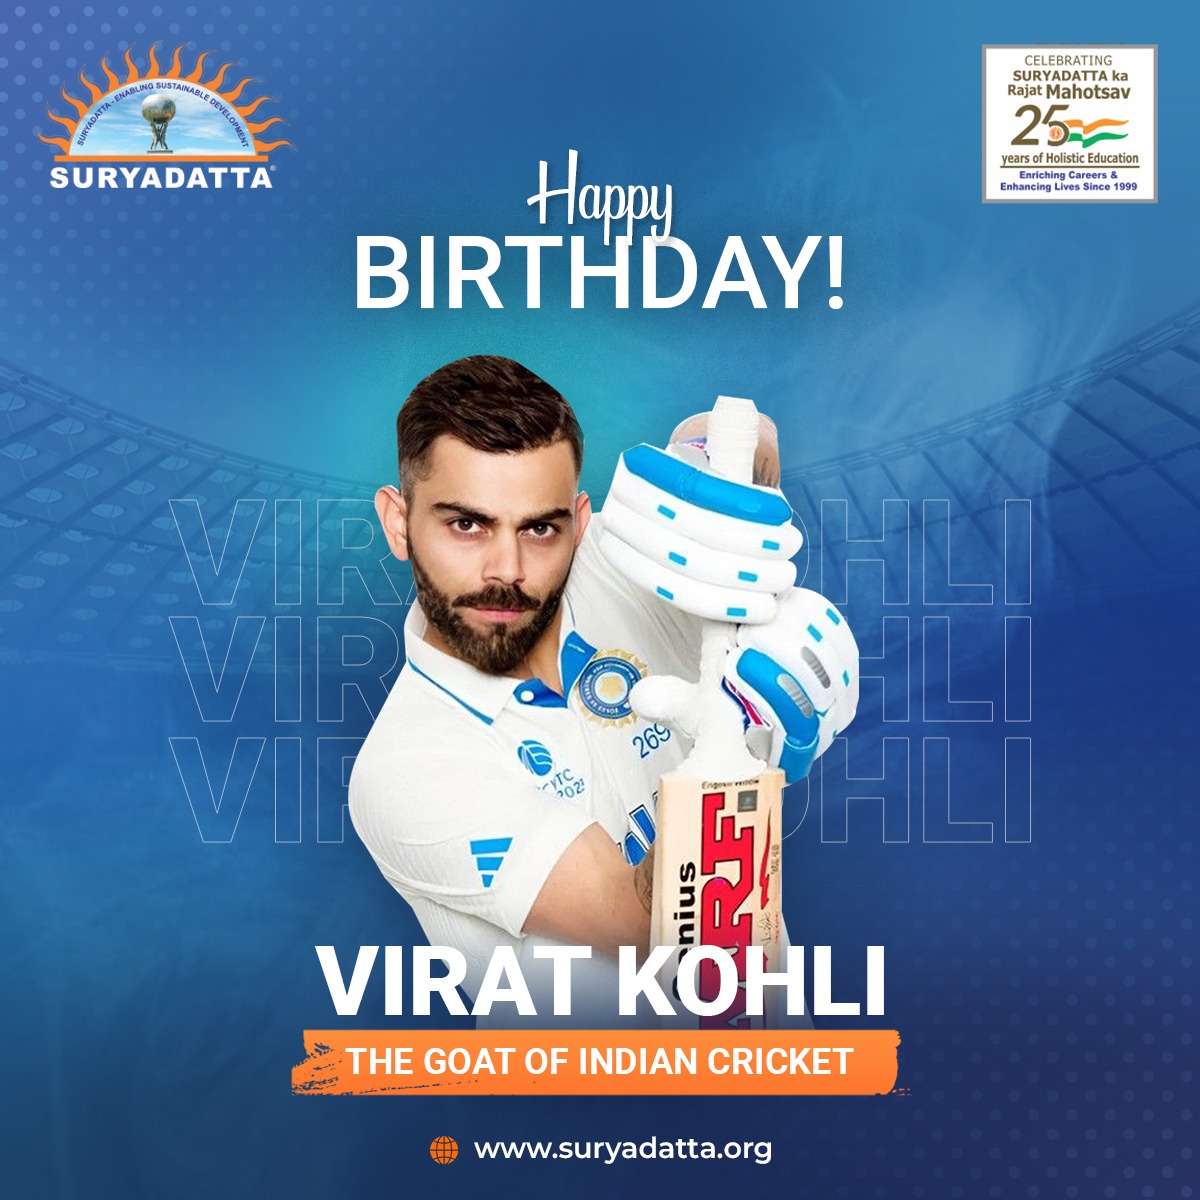 We at Suryadatta Group of Institutes Wish the cricket maestro, Virat Kohli, a magnificent birthday! Known as the GOAT for his unparalleled feats on the cricket field, your determination and skill redefine excellence. #SGI #HappyBirthdayVirat #ViratKohli #KingKohli #Legend #GOAT